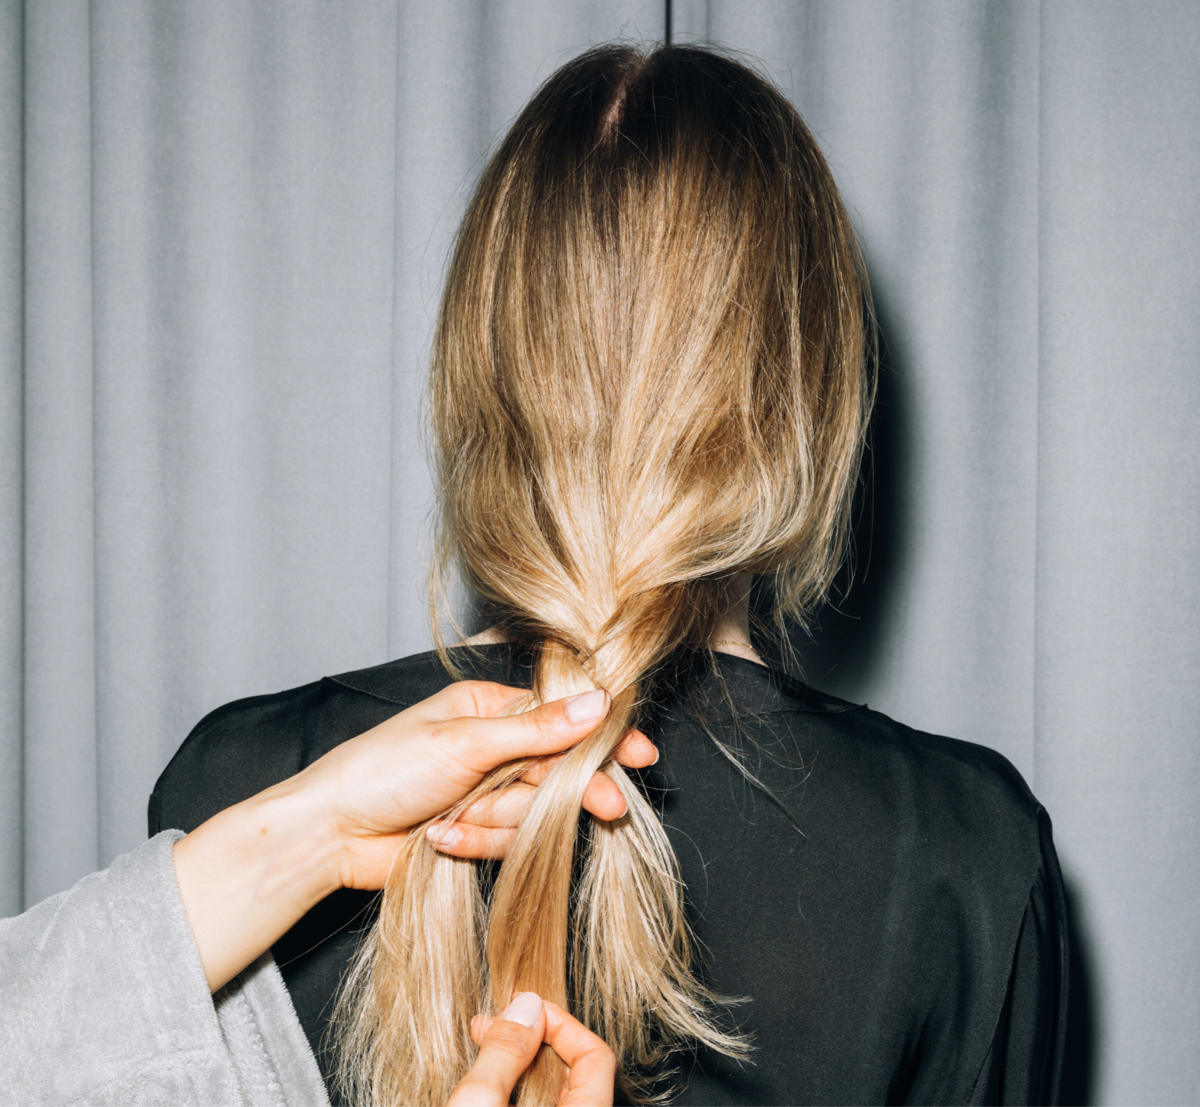 How to Get Rid of Thin, Frizzy Hair